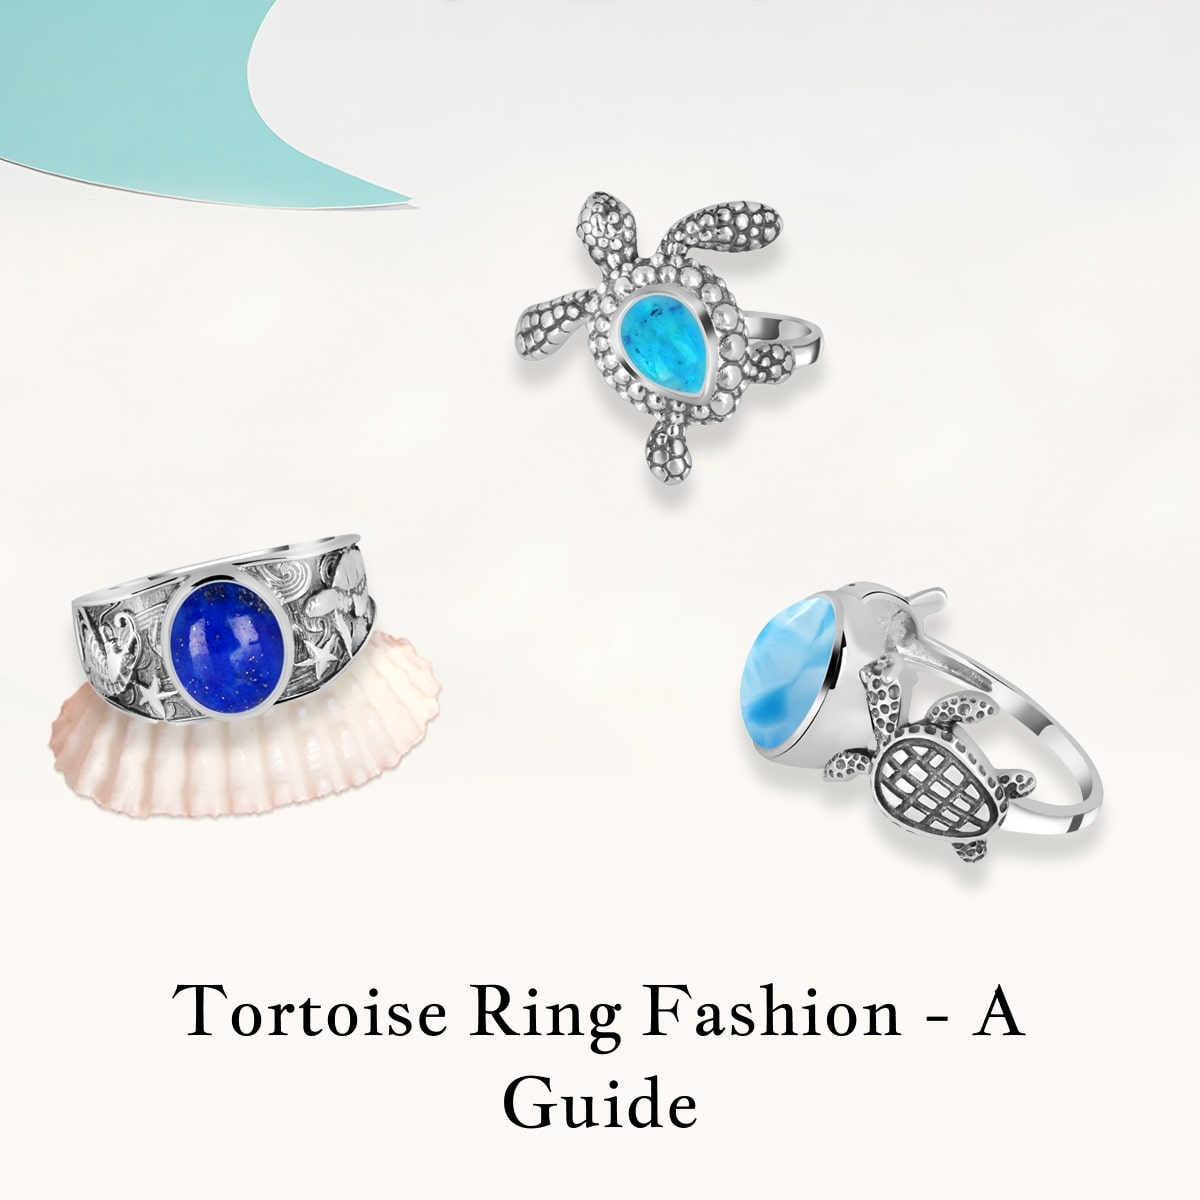 How to wear a Turtle Ring